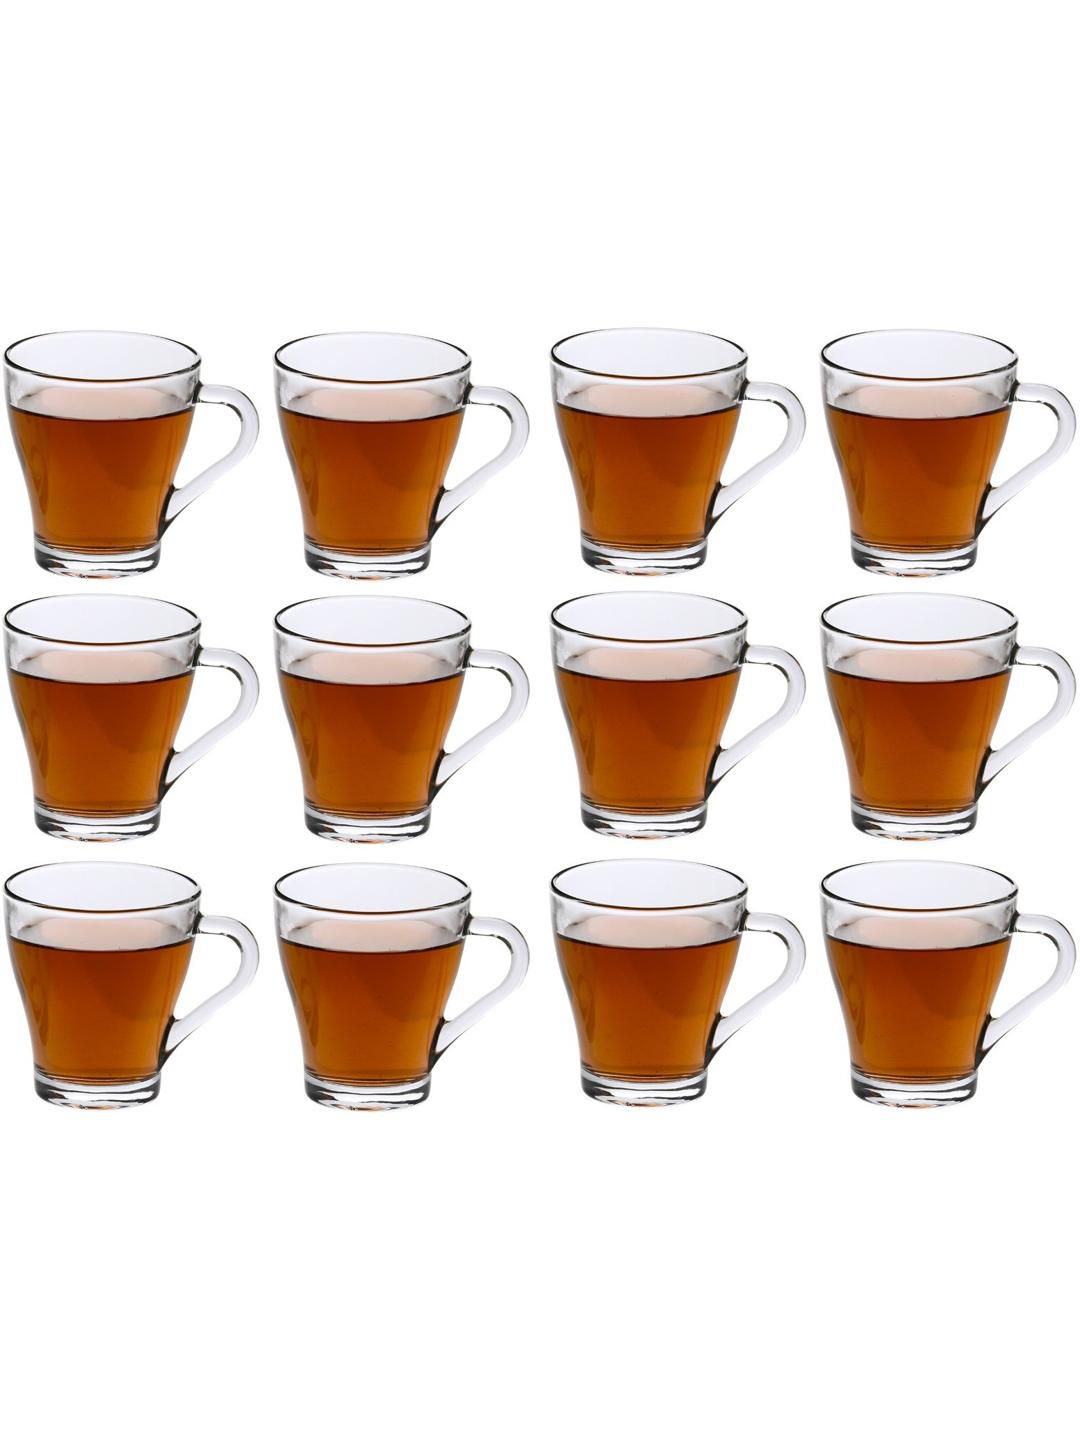     			Somil Glass Coffee & Tea Cup Solid Glass Tea Set 240 ml ( Pack of 10 )